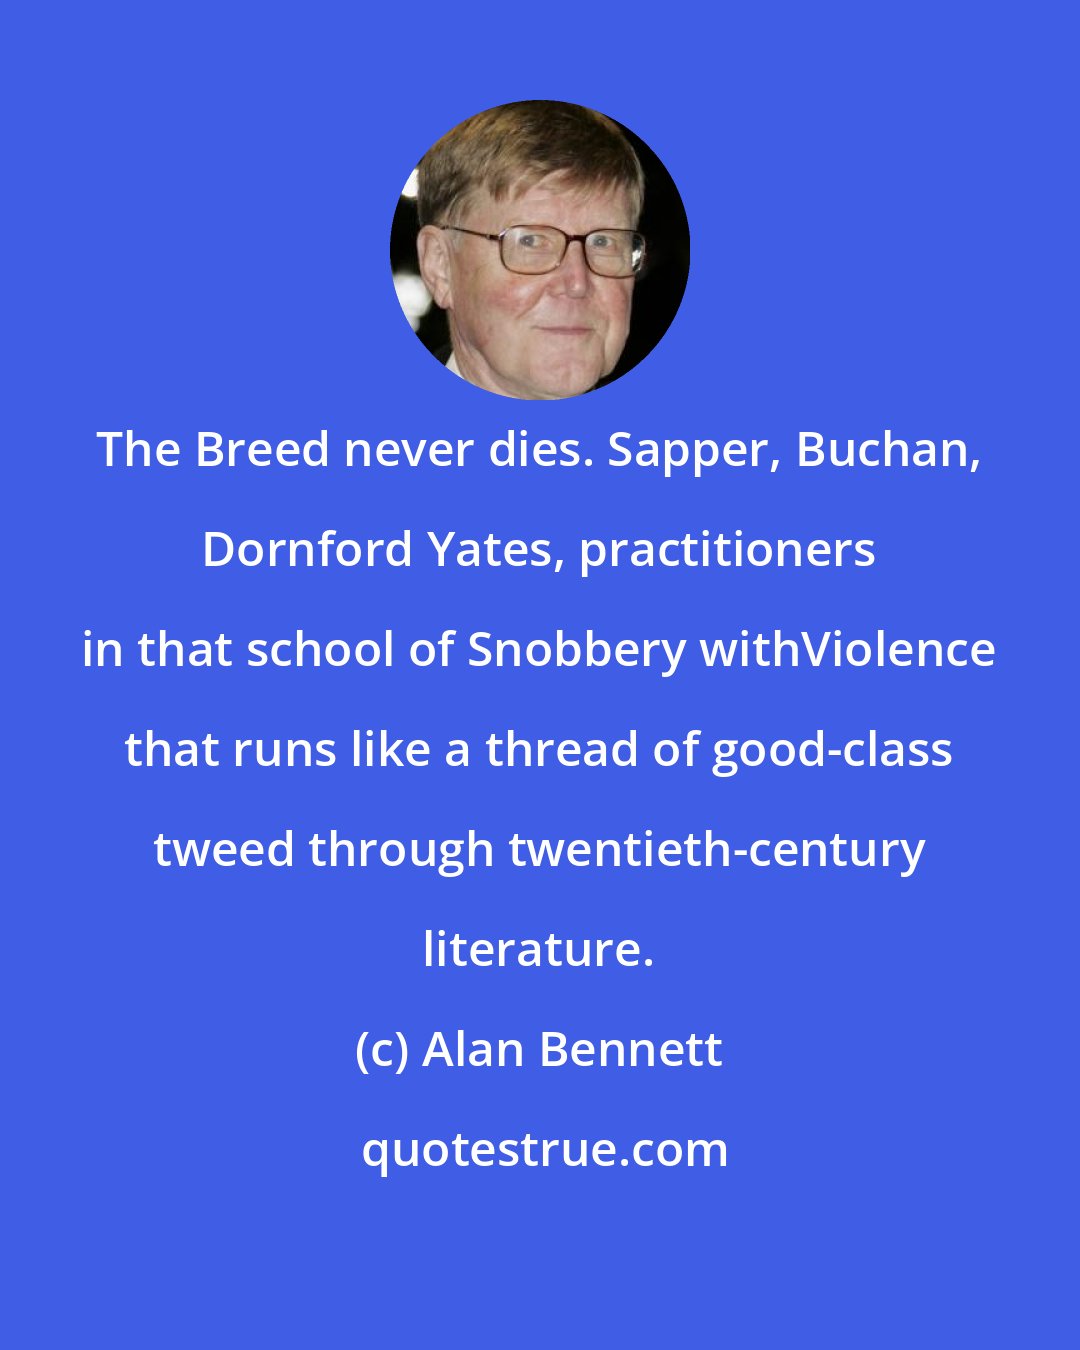 Alan Bennett: The Breed never dies. Sapper, Buchan, Dornford Yates, practitioners in that school of Snobbery withViolence that runs like a thread of good-class tweed through twentieth-century literature.